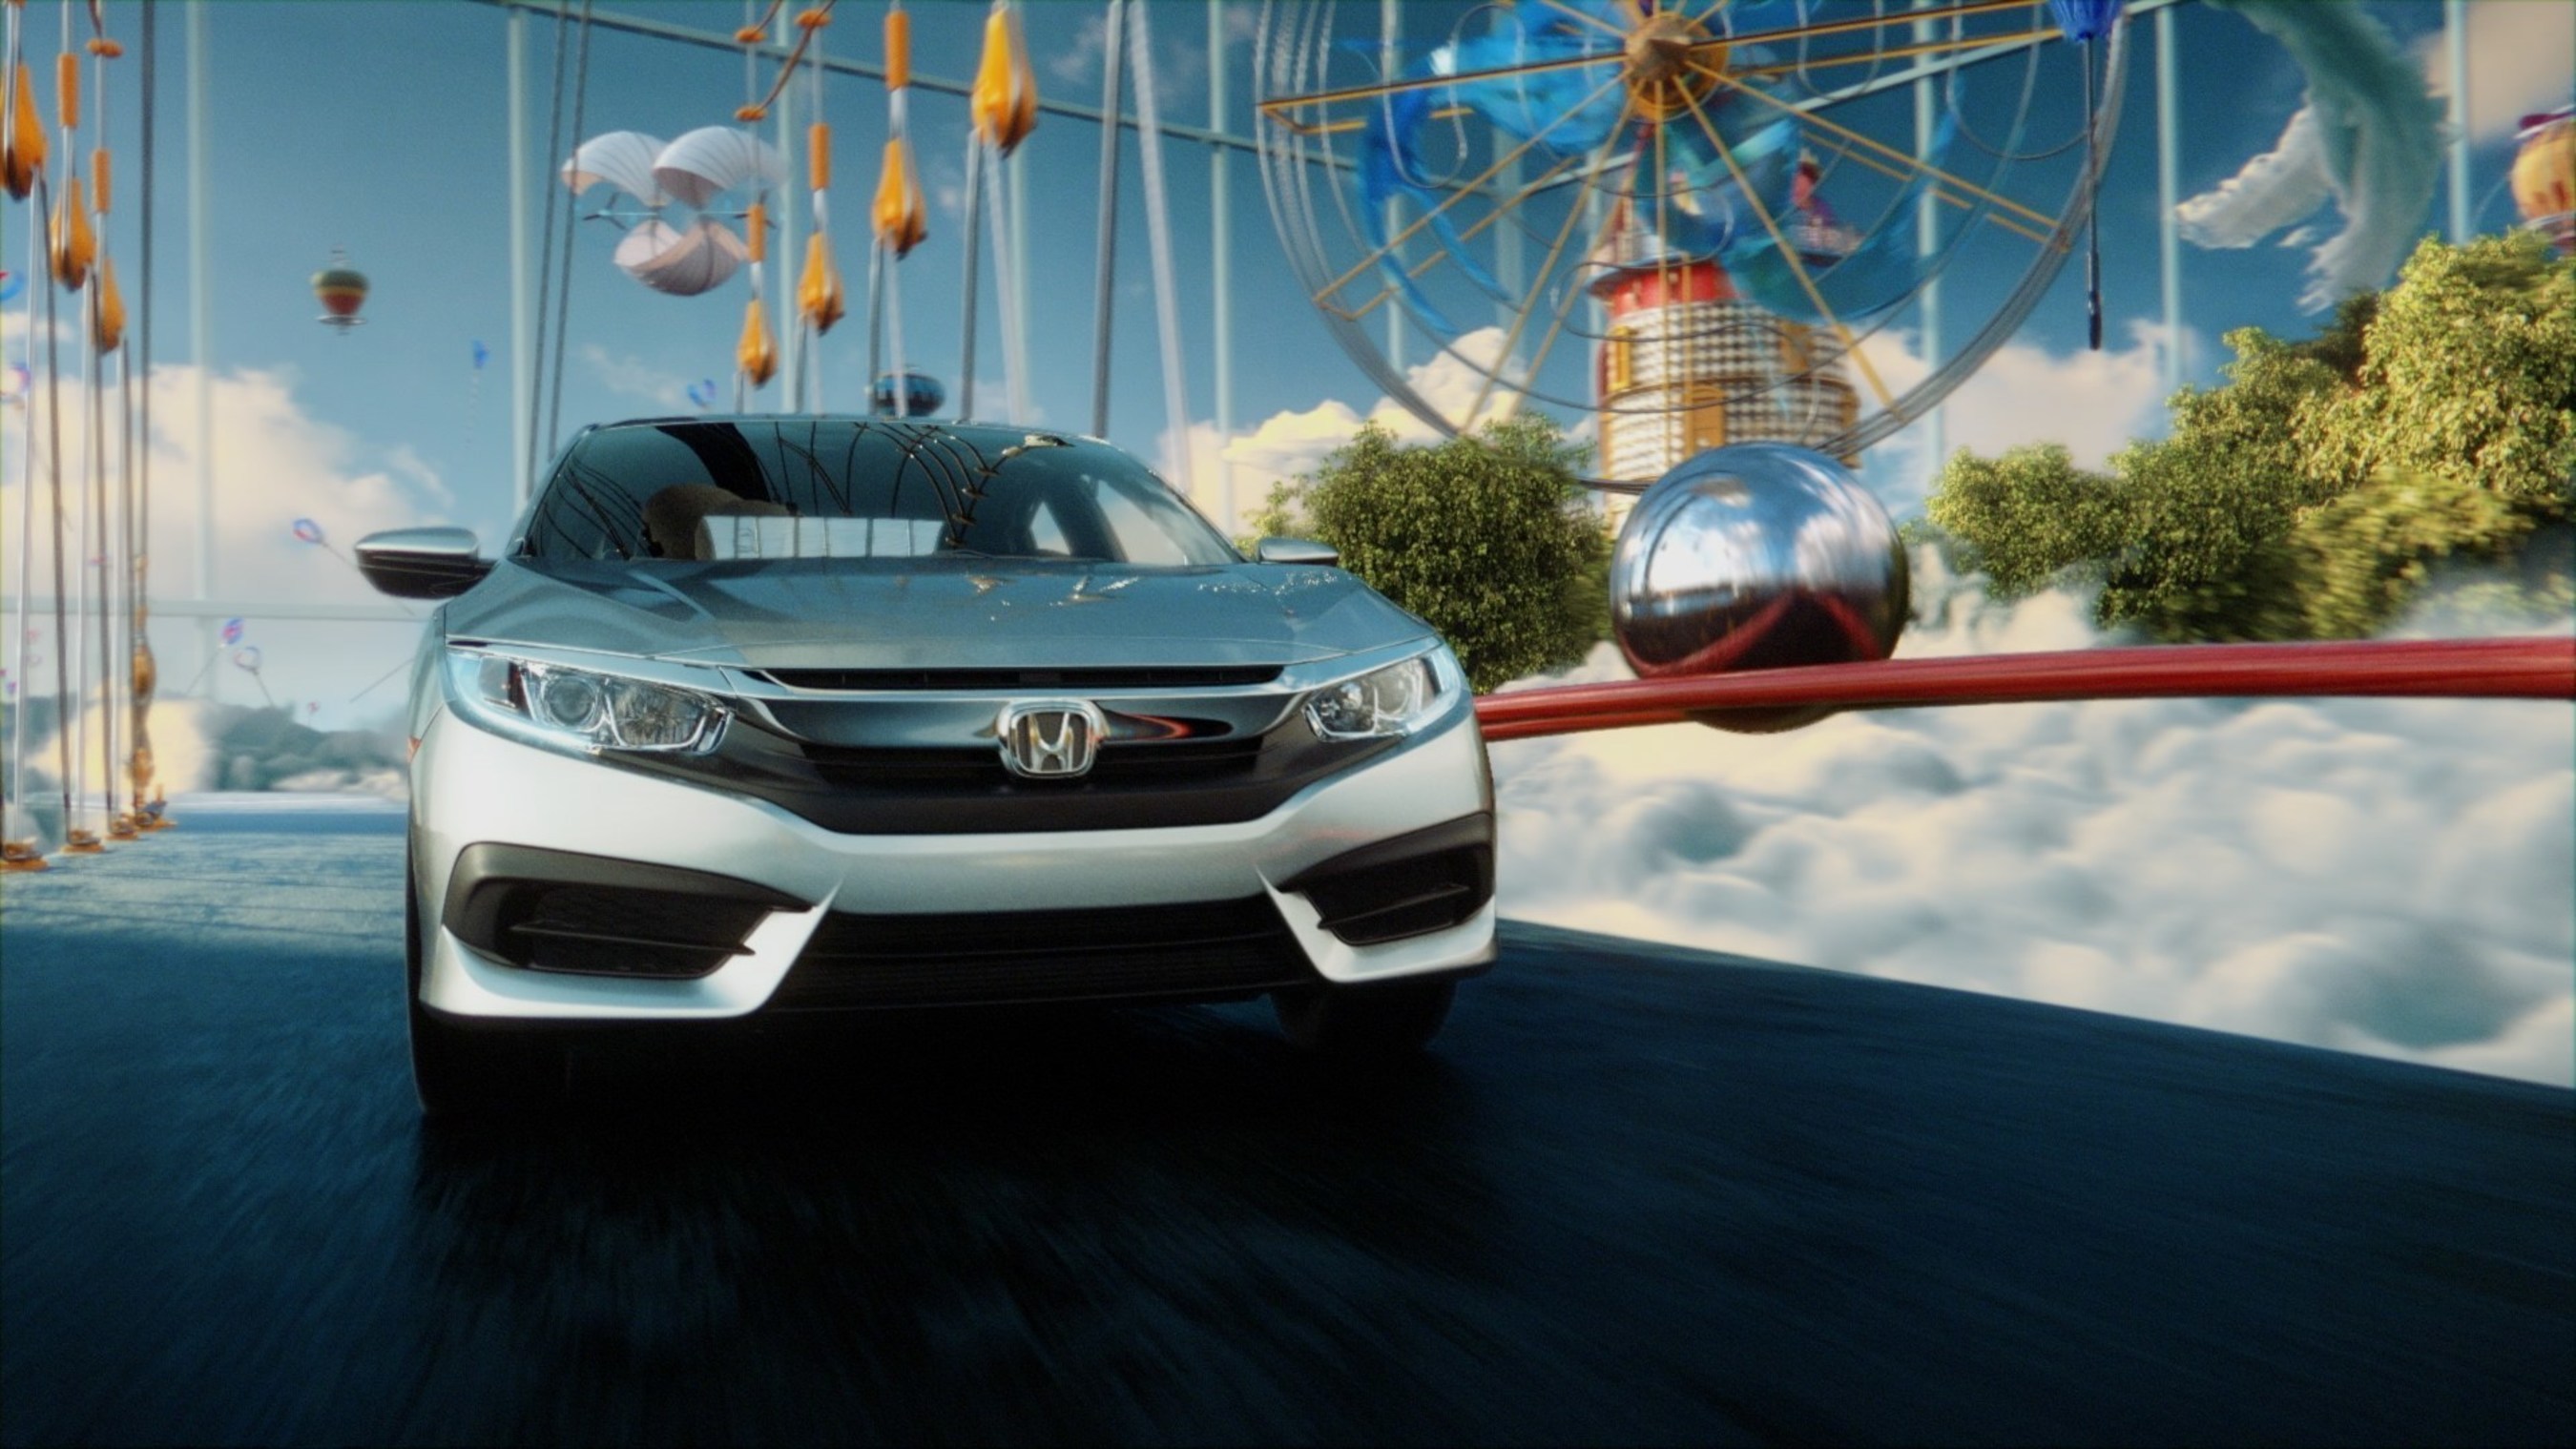 New Honda Advertising Campaign, "Dreamer" Celebrates the Imaginative, Innovative Redesign of the All-New 2016 Civic